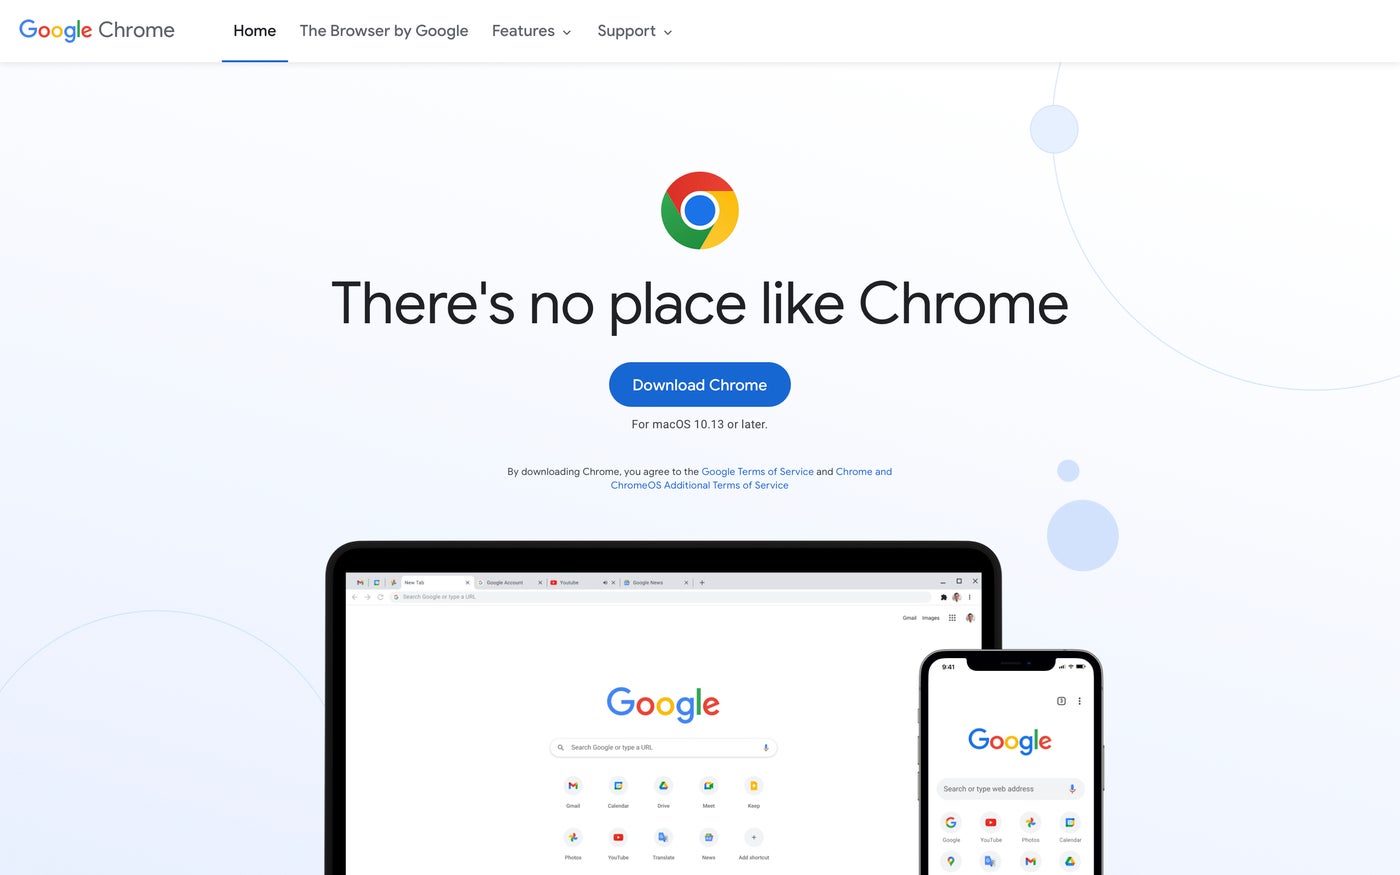 Google Chrome home page with a link to Download Chrome